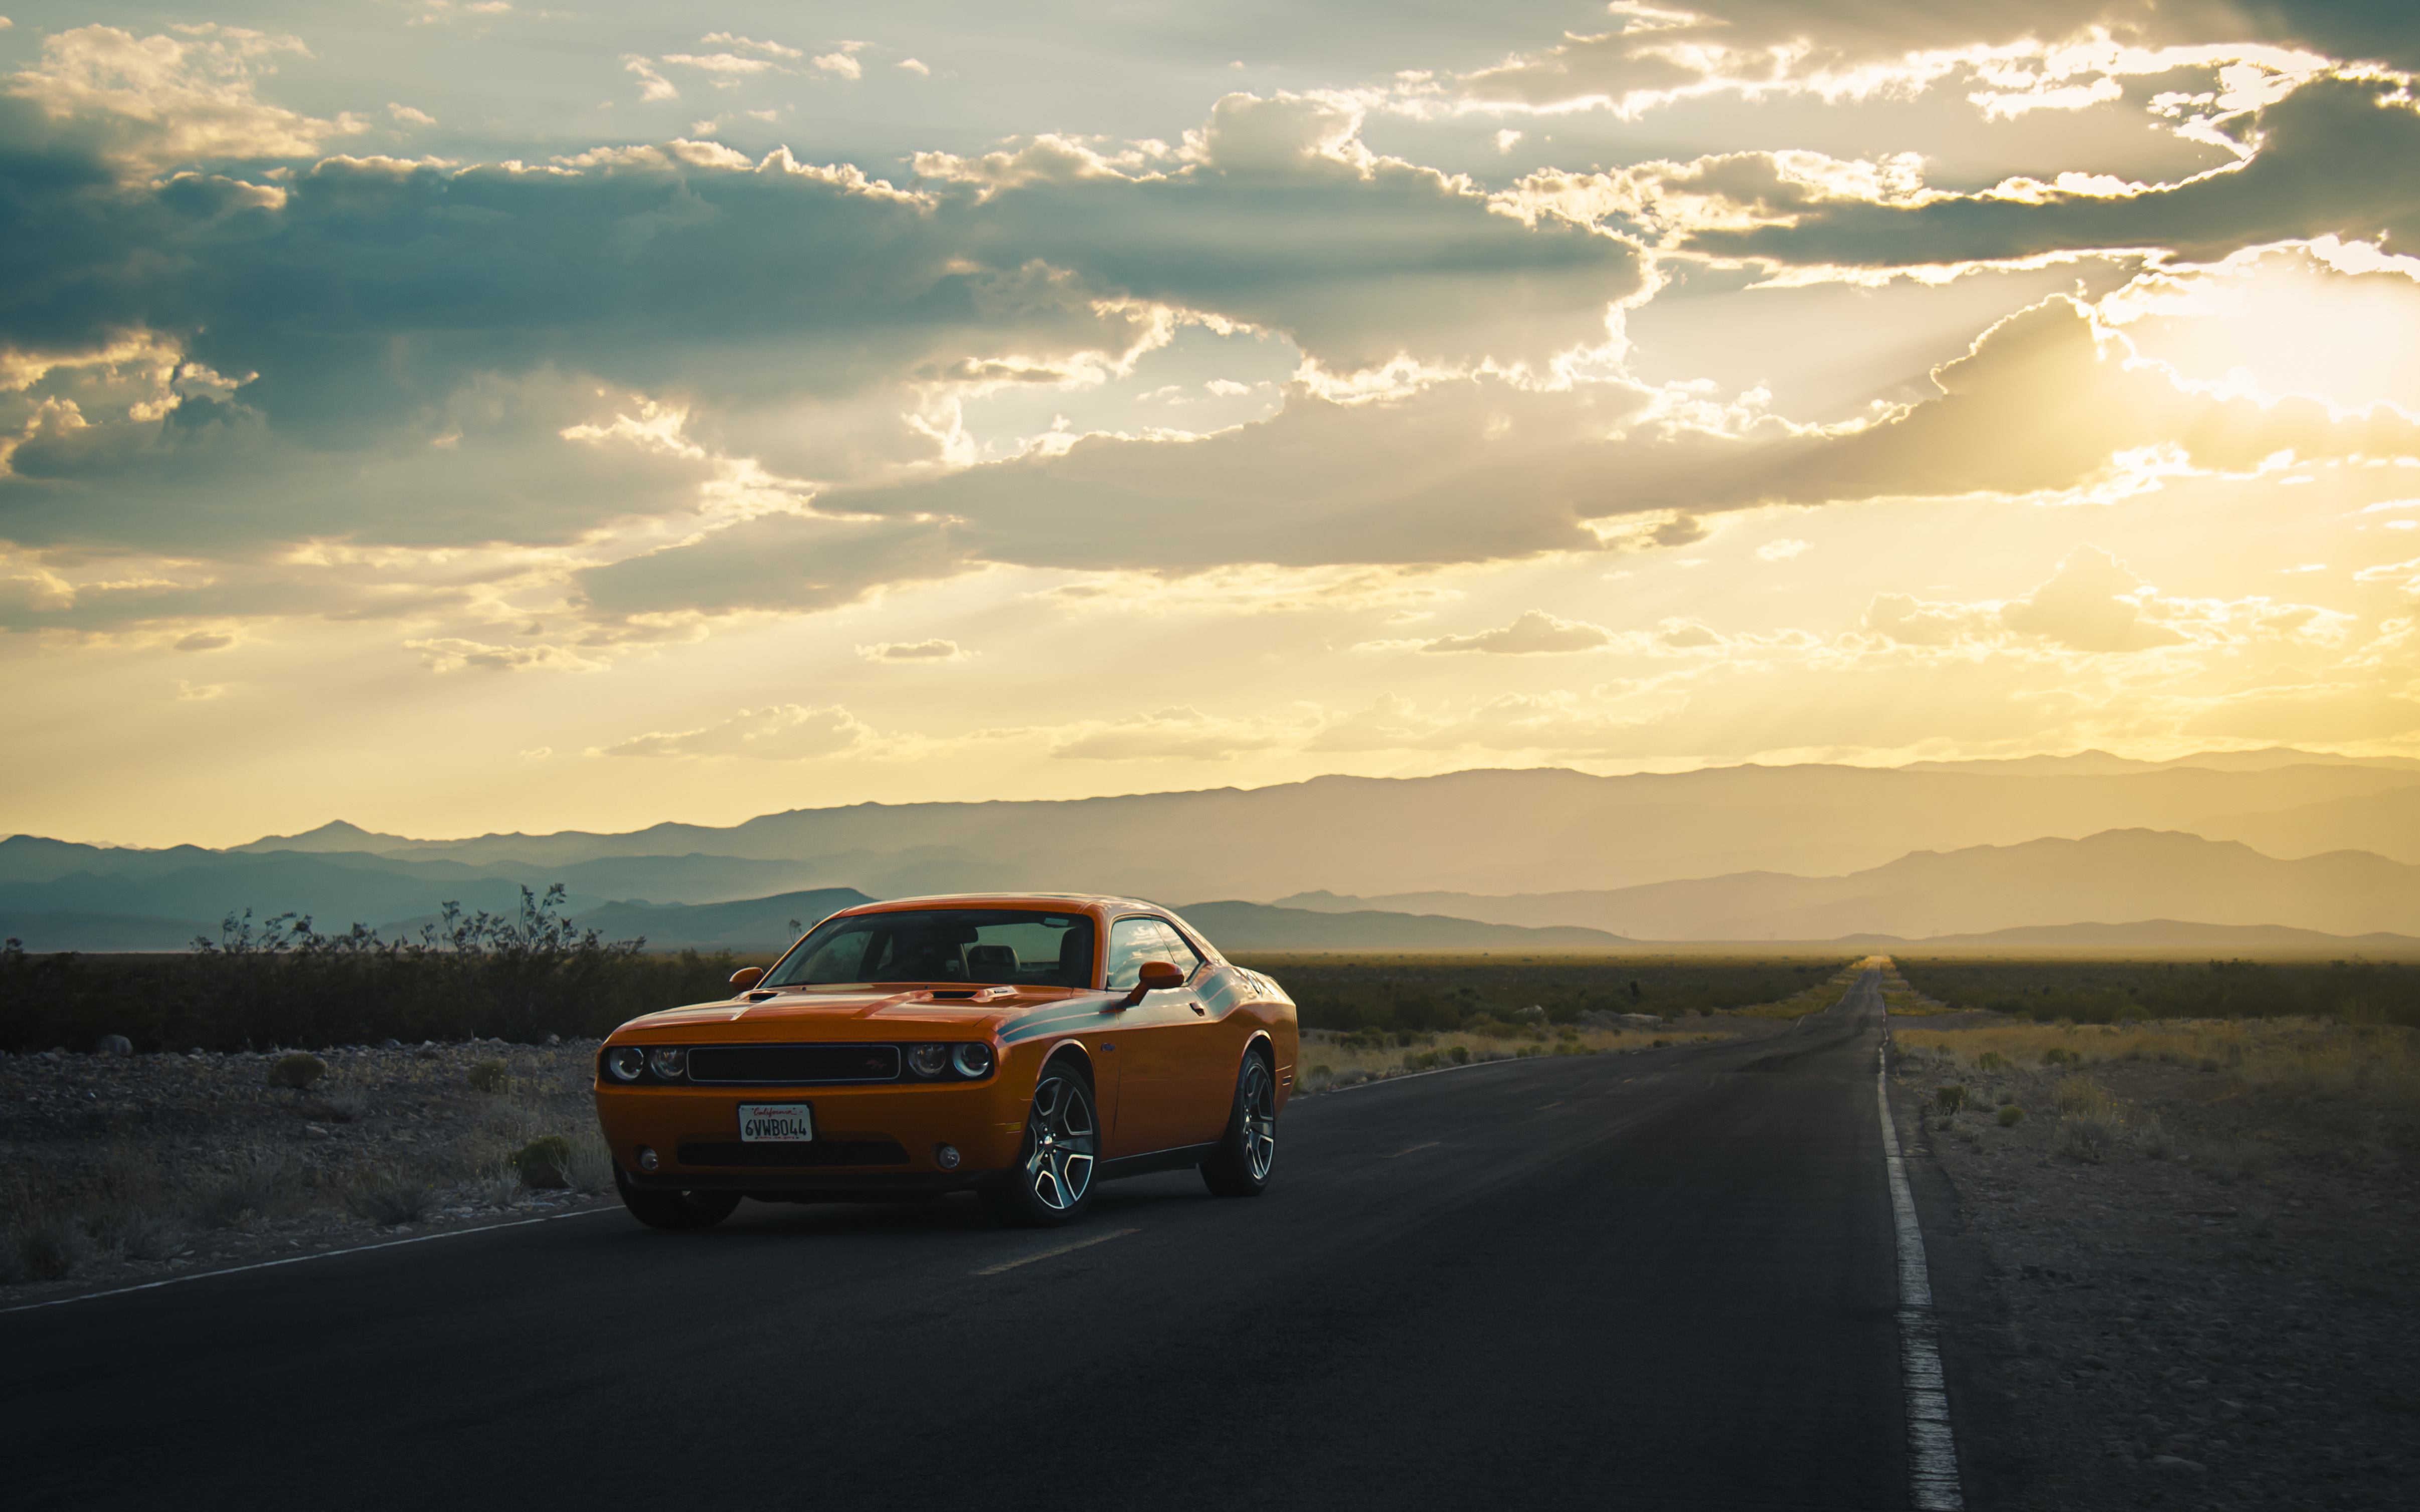 dodge, cars, road, side view, challenger wallpaper for mobile